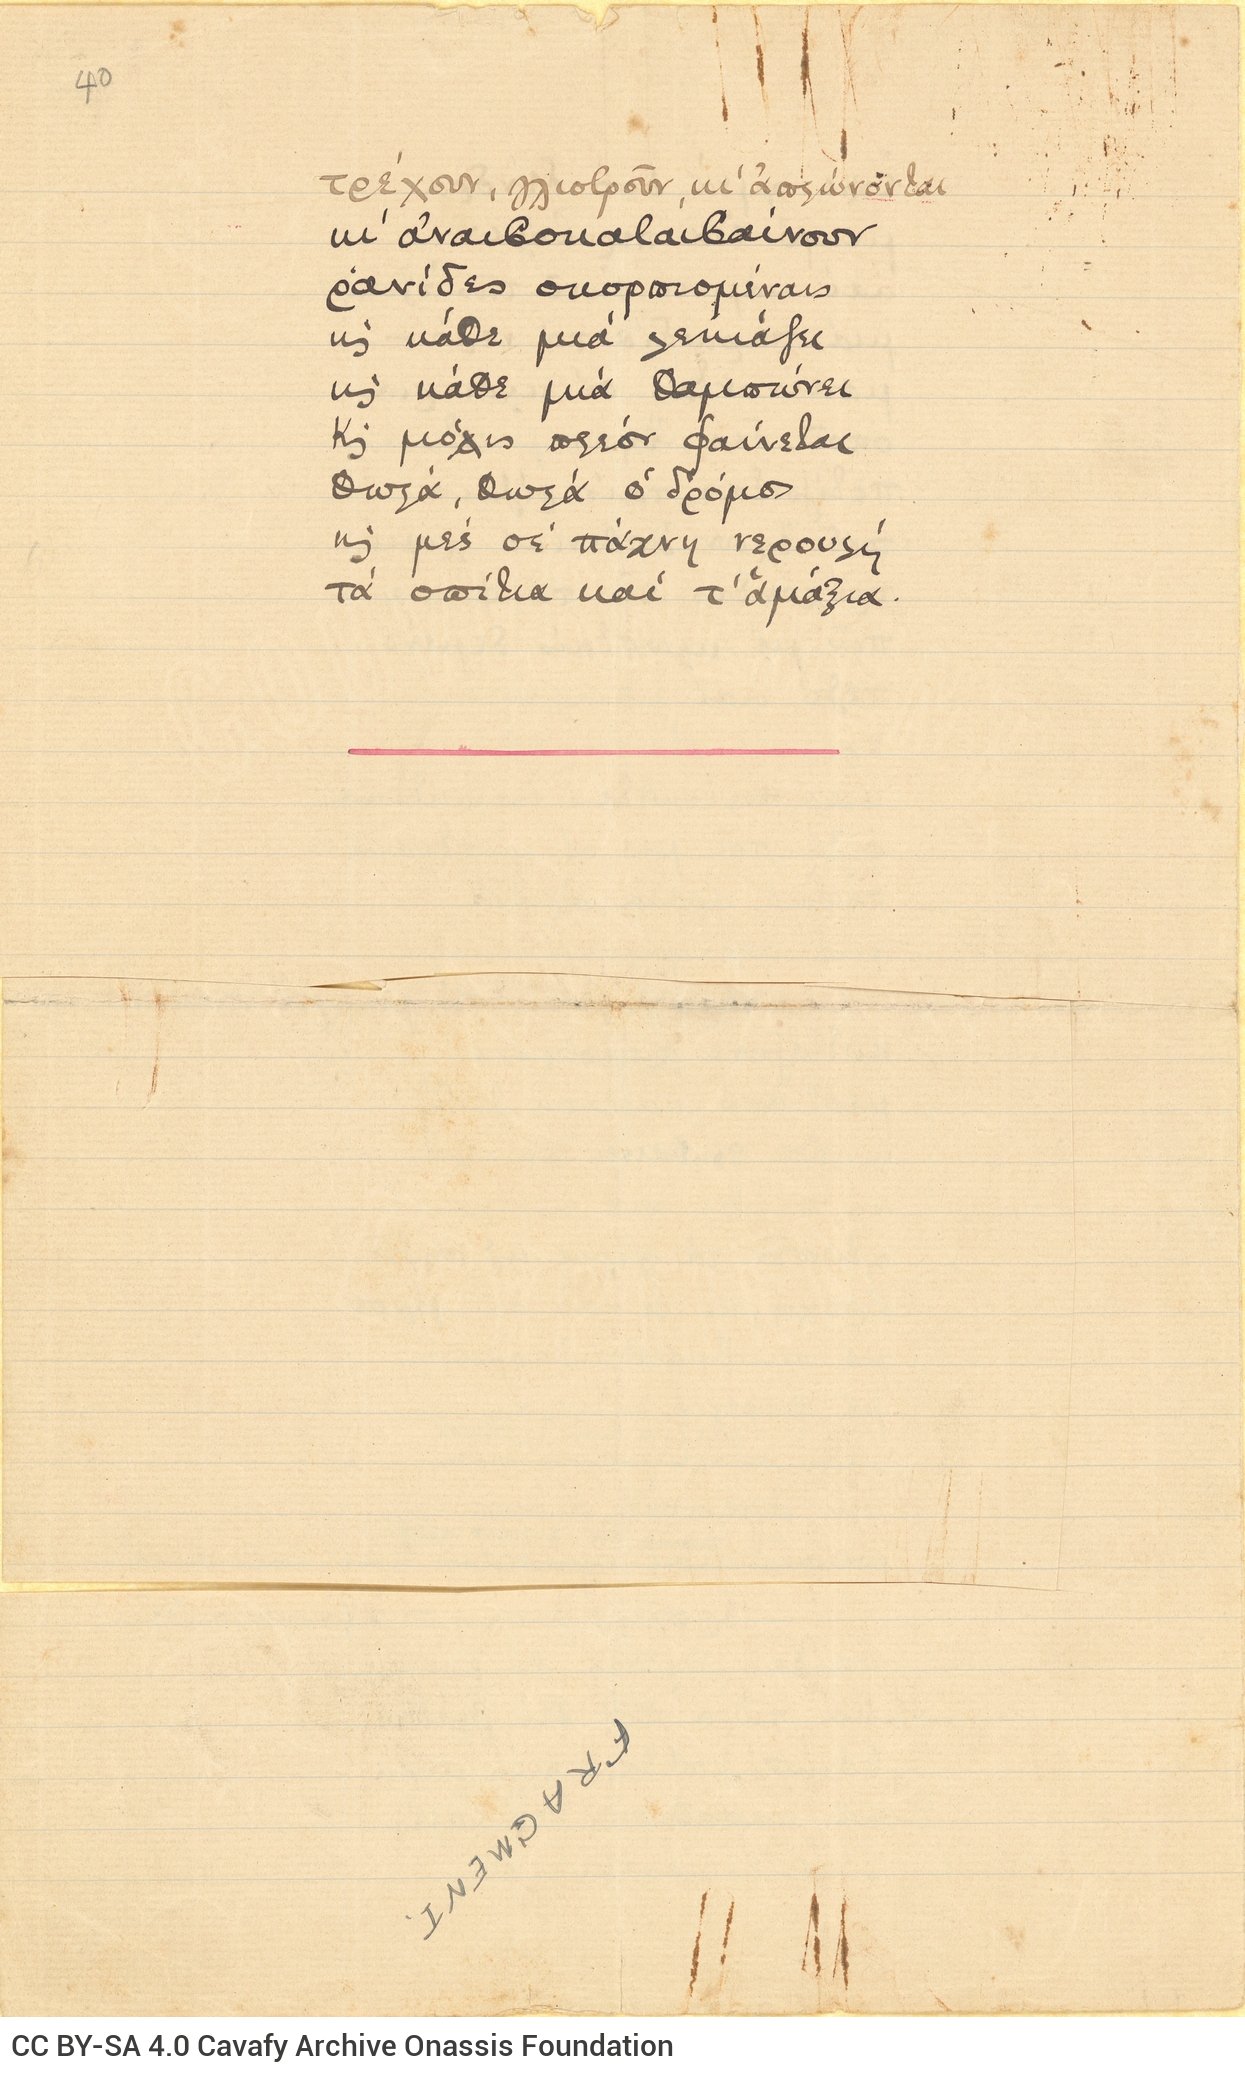 Manuscript of an untitled poem on both sides of a sheet. Page numbers are indicated: "39" on the recto, "40" on the verso.